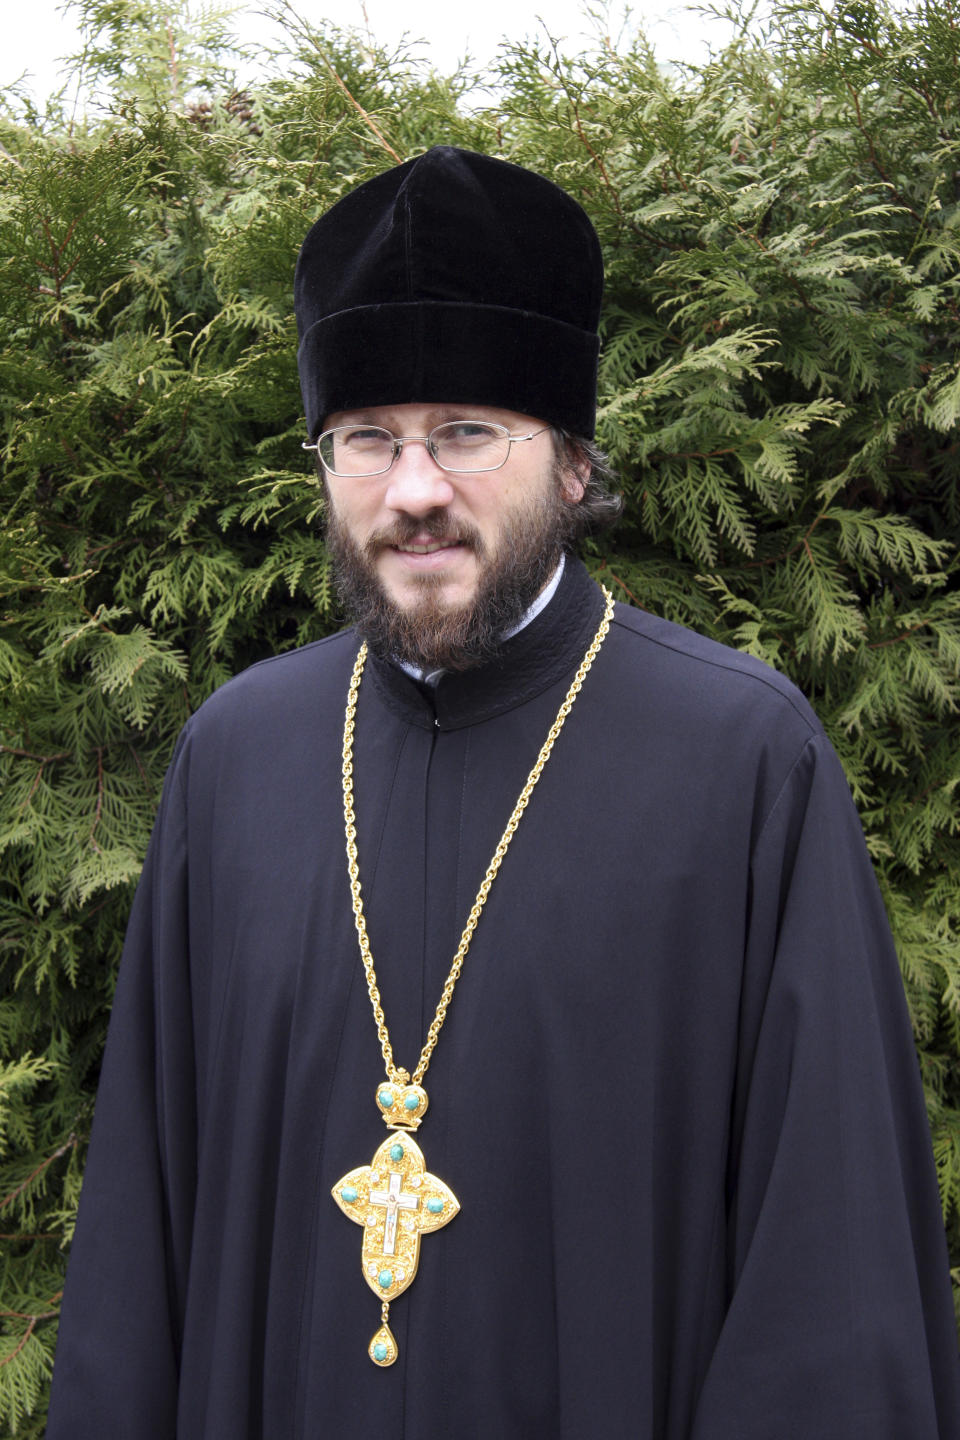 This 2008 photo provided by Cyril Hovorun shows him at the Kiev-Pechersk Lavra, the Monastery of the Caves, in Kiev, Ukraine. In 2012 Hovorun was an official within the Moscow Patriarchate, but he resigned after hackers published emails showing that he secretly supported independence-leaning Ukrainian clergy. “We've known about this tactic before the hacking of the Democrats,” Hovorun said, referring to the email disclosures that rocked America’s 2016 presidential campaign. “This is a familiar story for us.” (Courtesy Cyril Hovorun via AP)